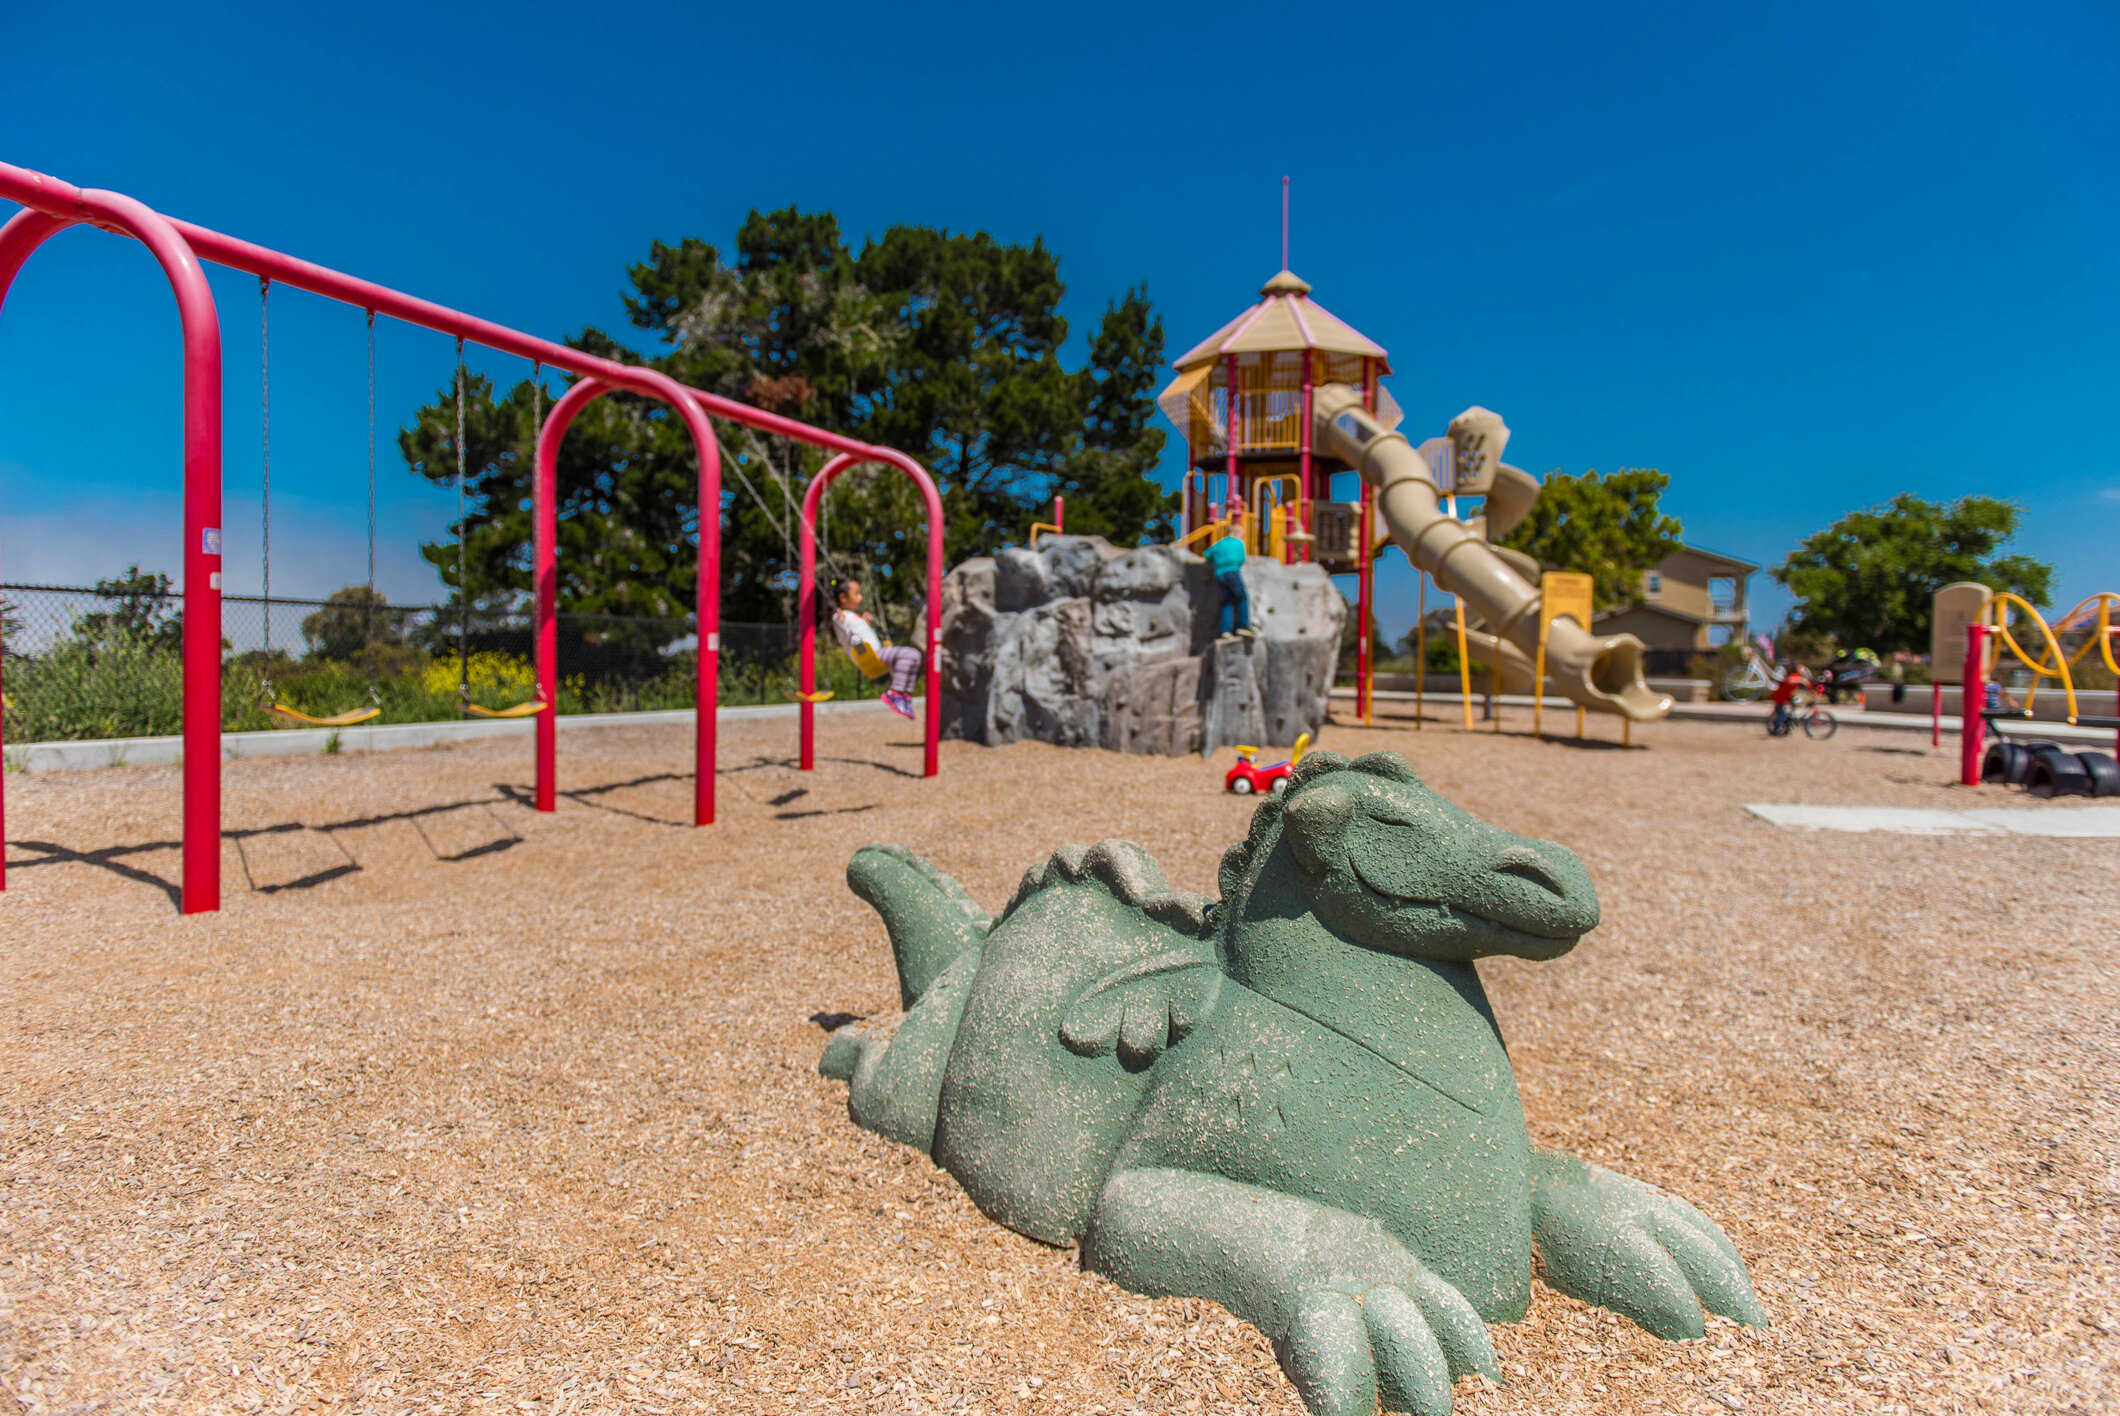 We have over 30 play structures throughout our neighborhoods at The Parks at Monterey.